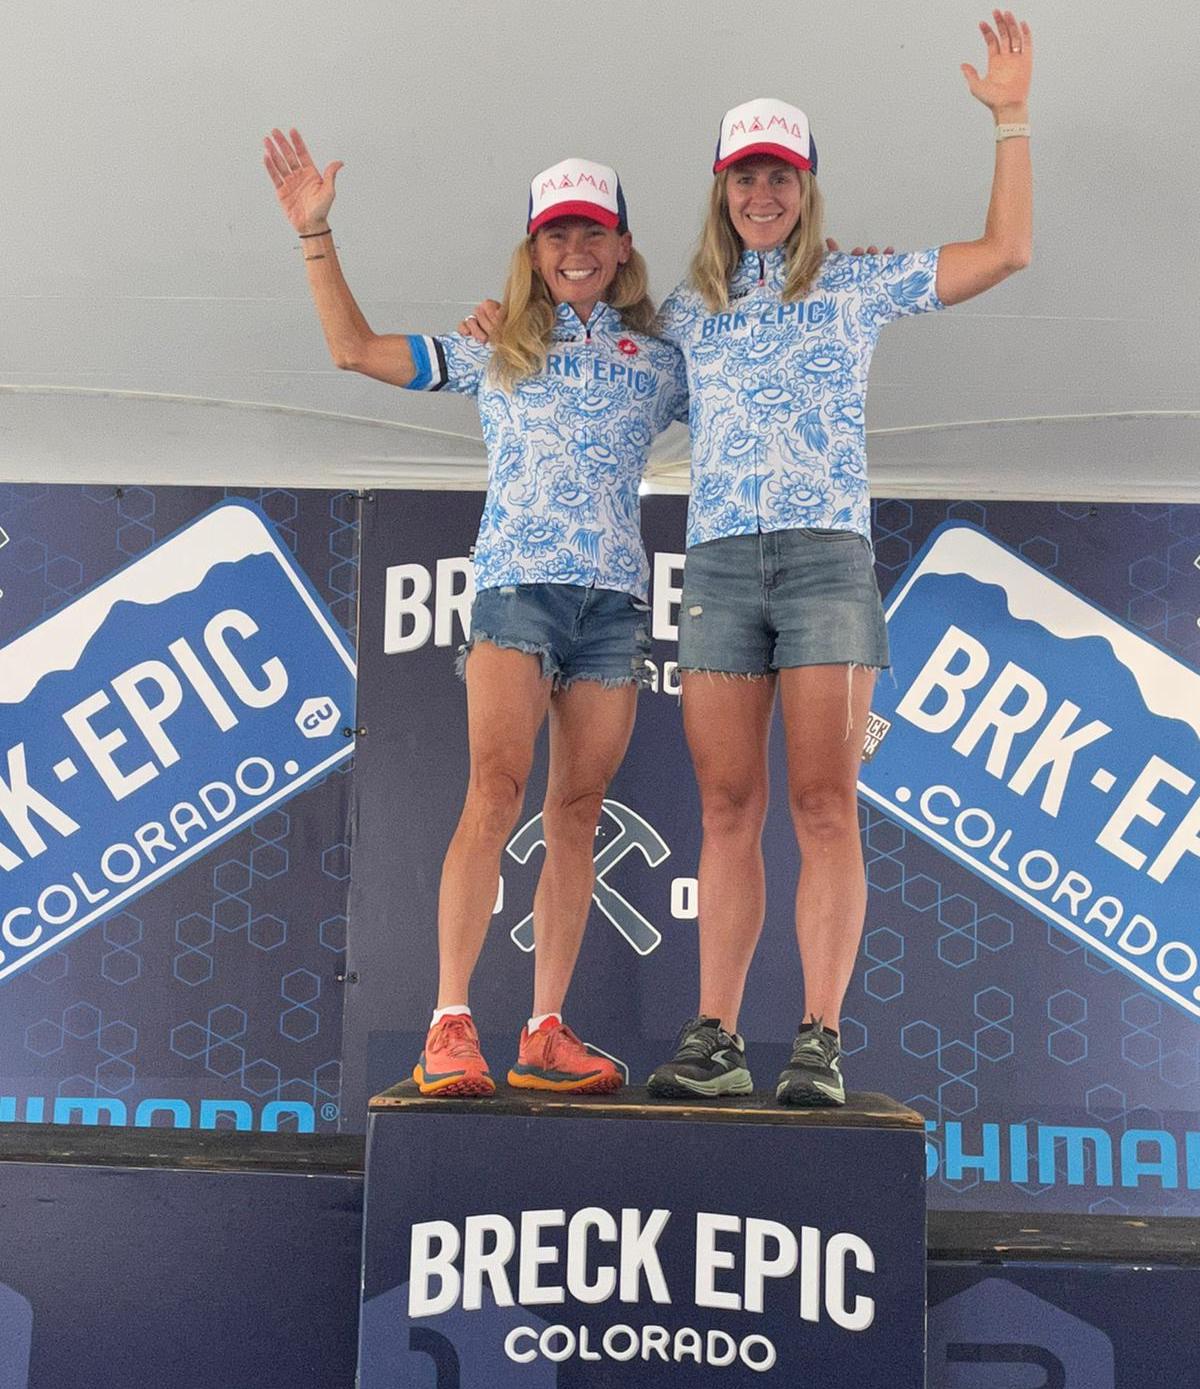 Deanna McCurdy completing the Breck Epic